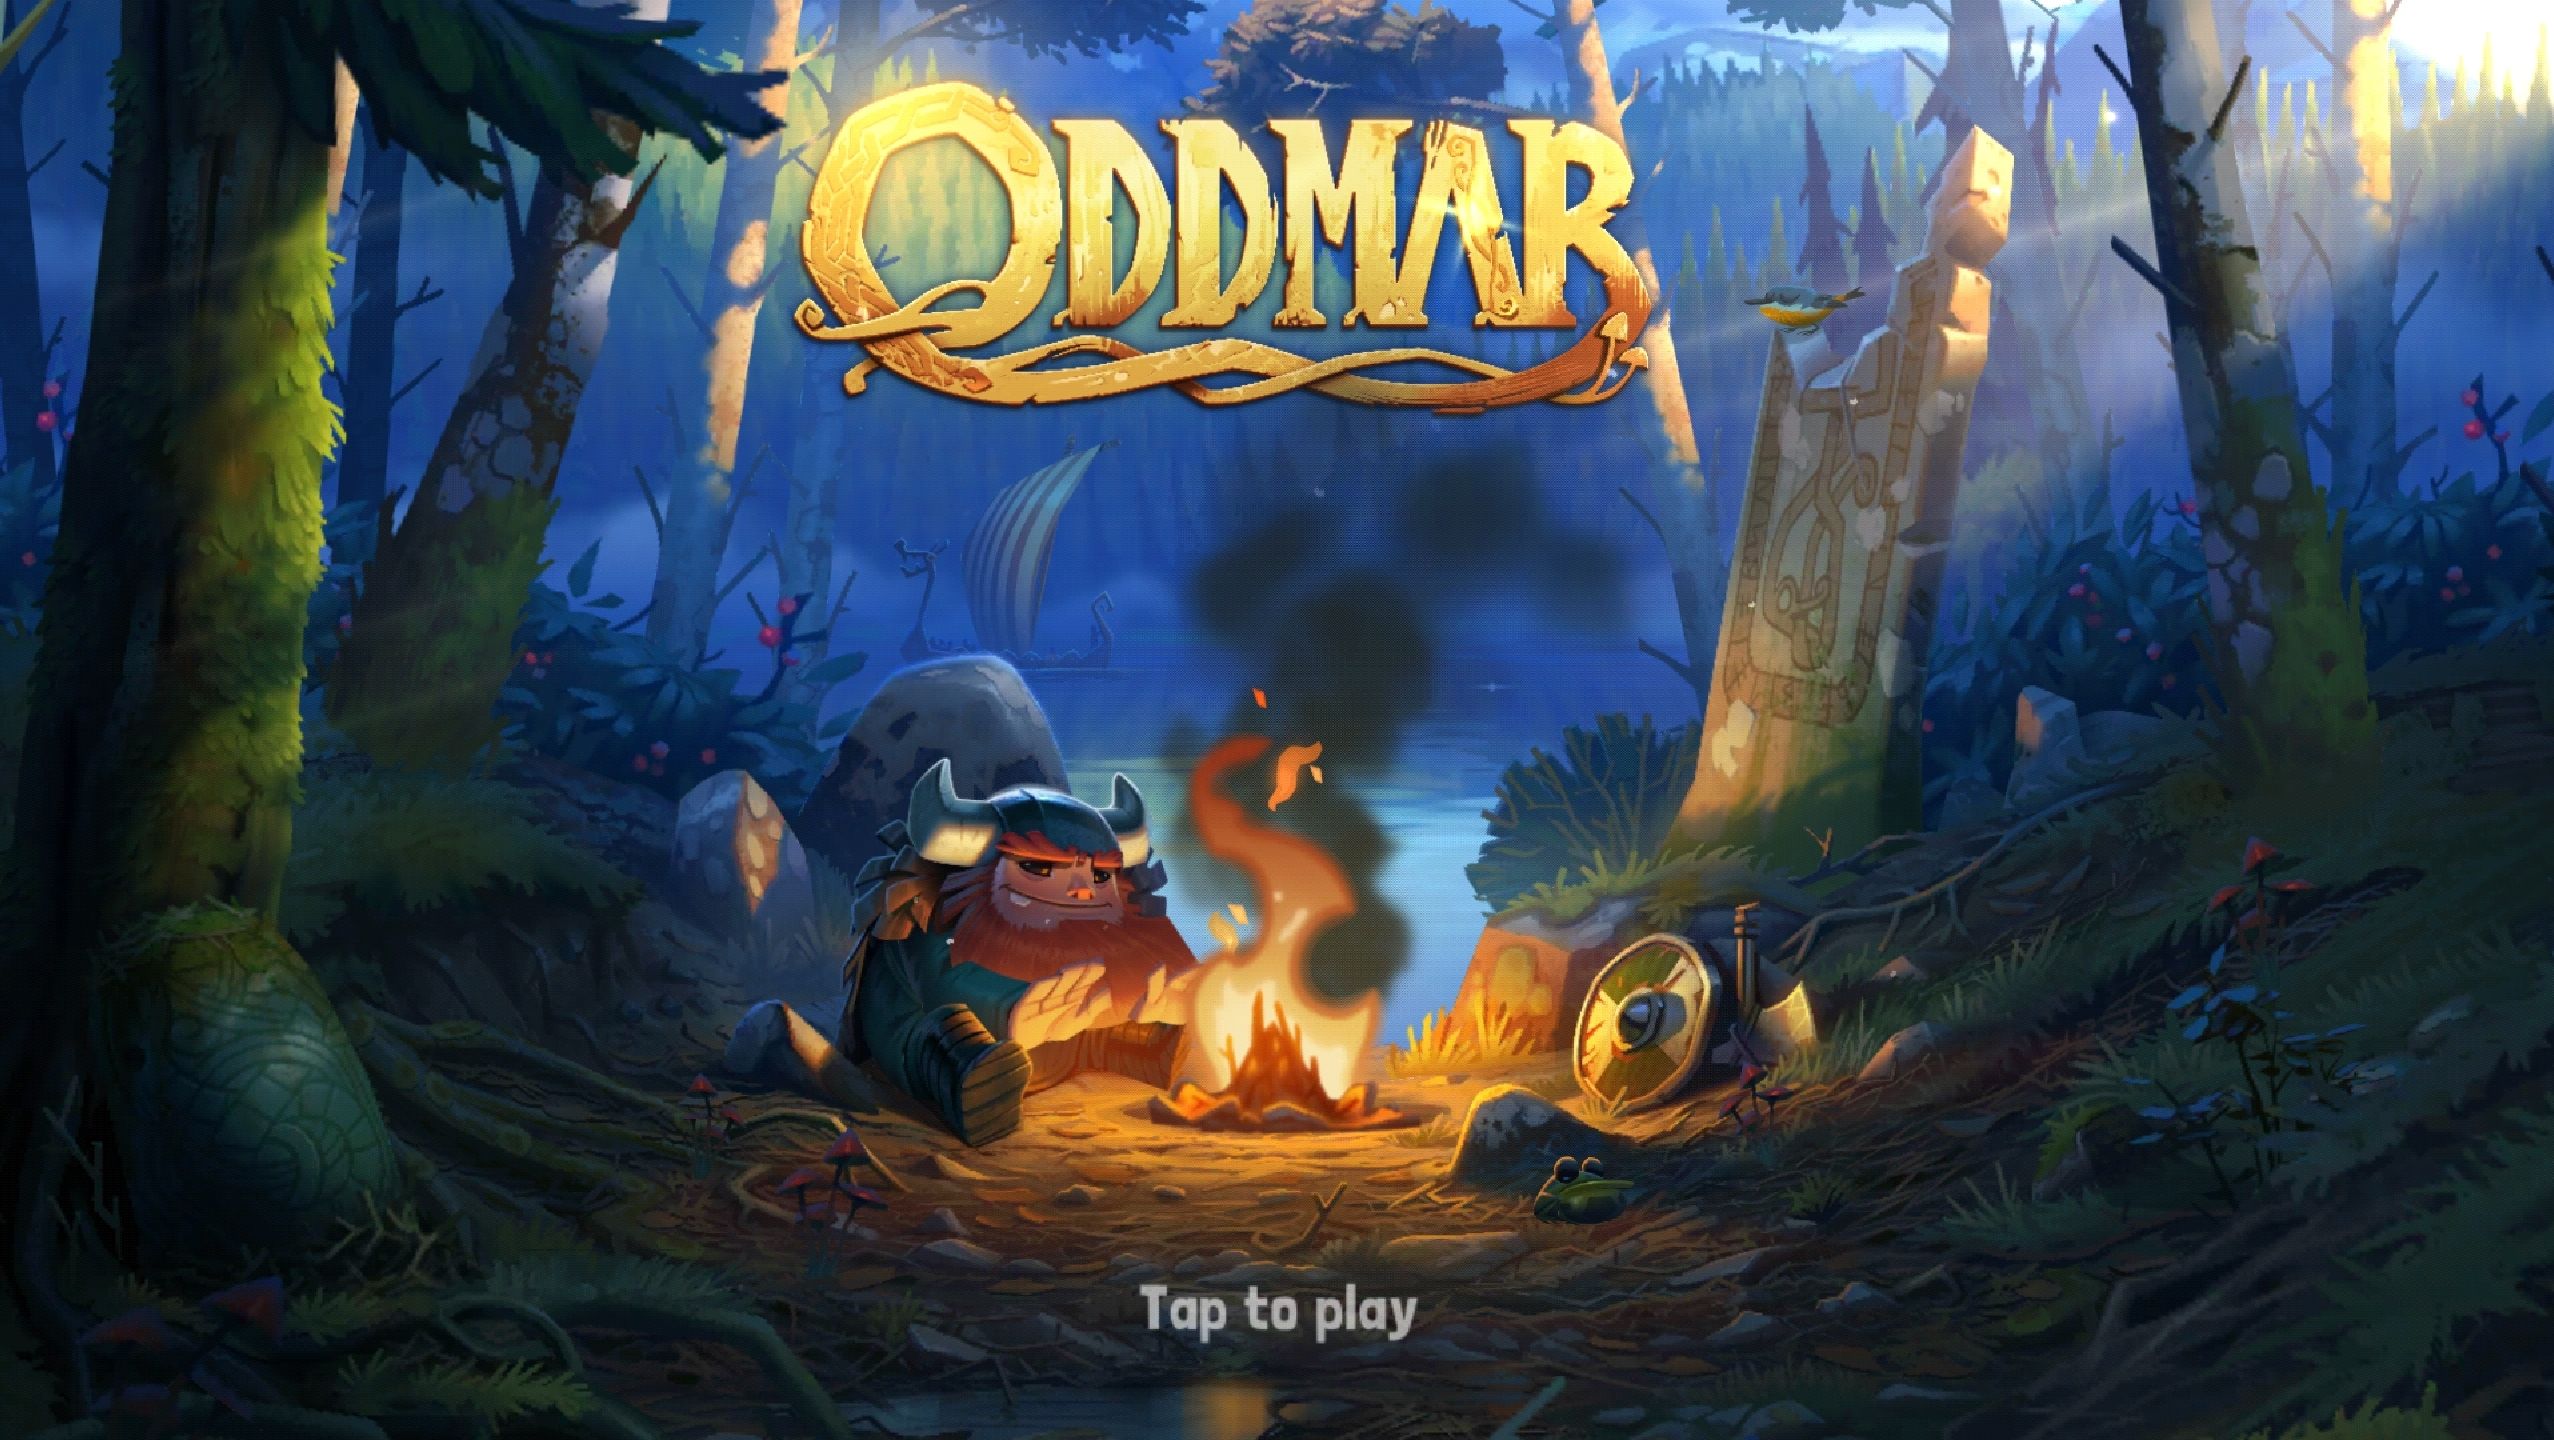 Gorgeous platformer Oddmar now available on the Play Store